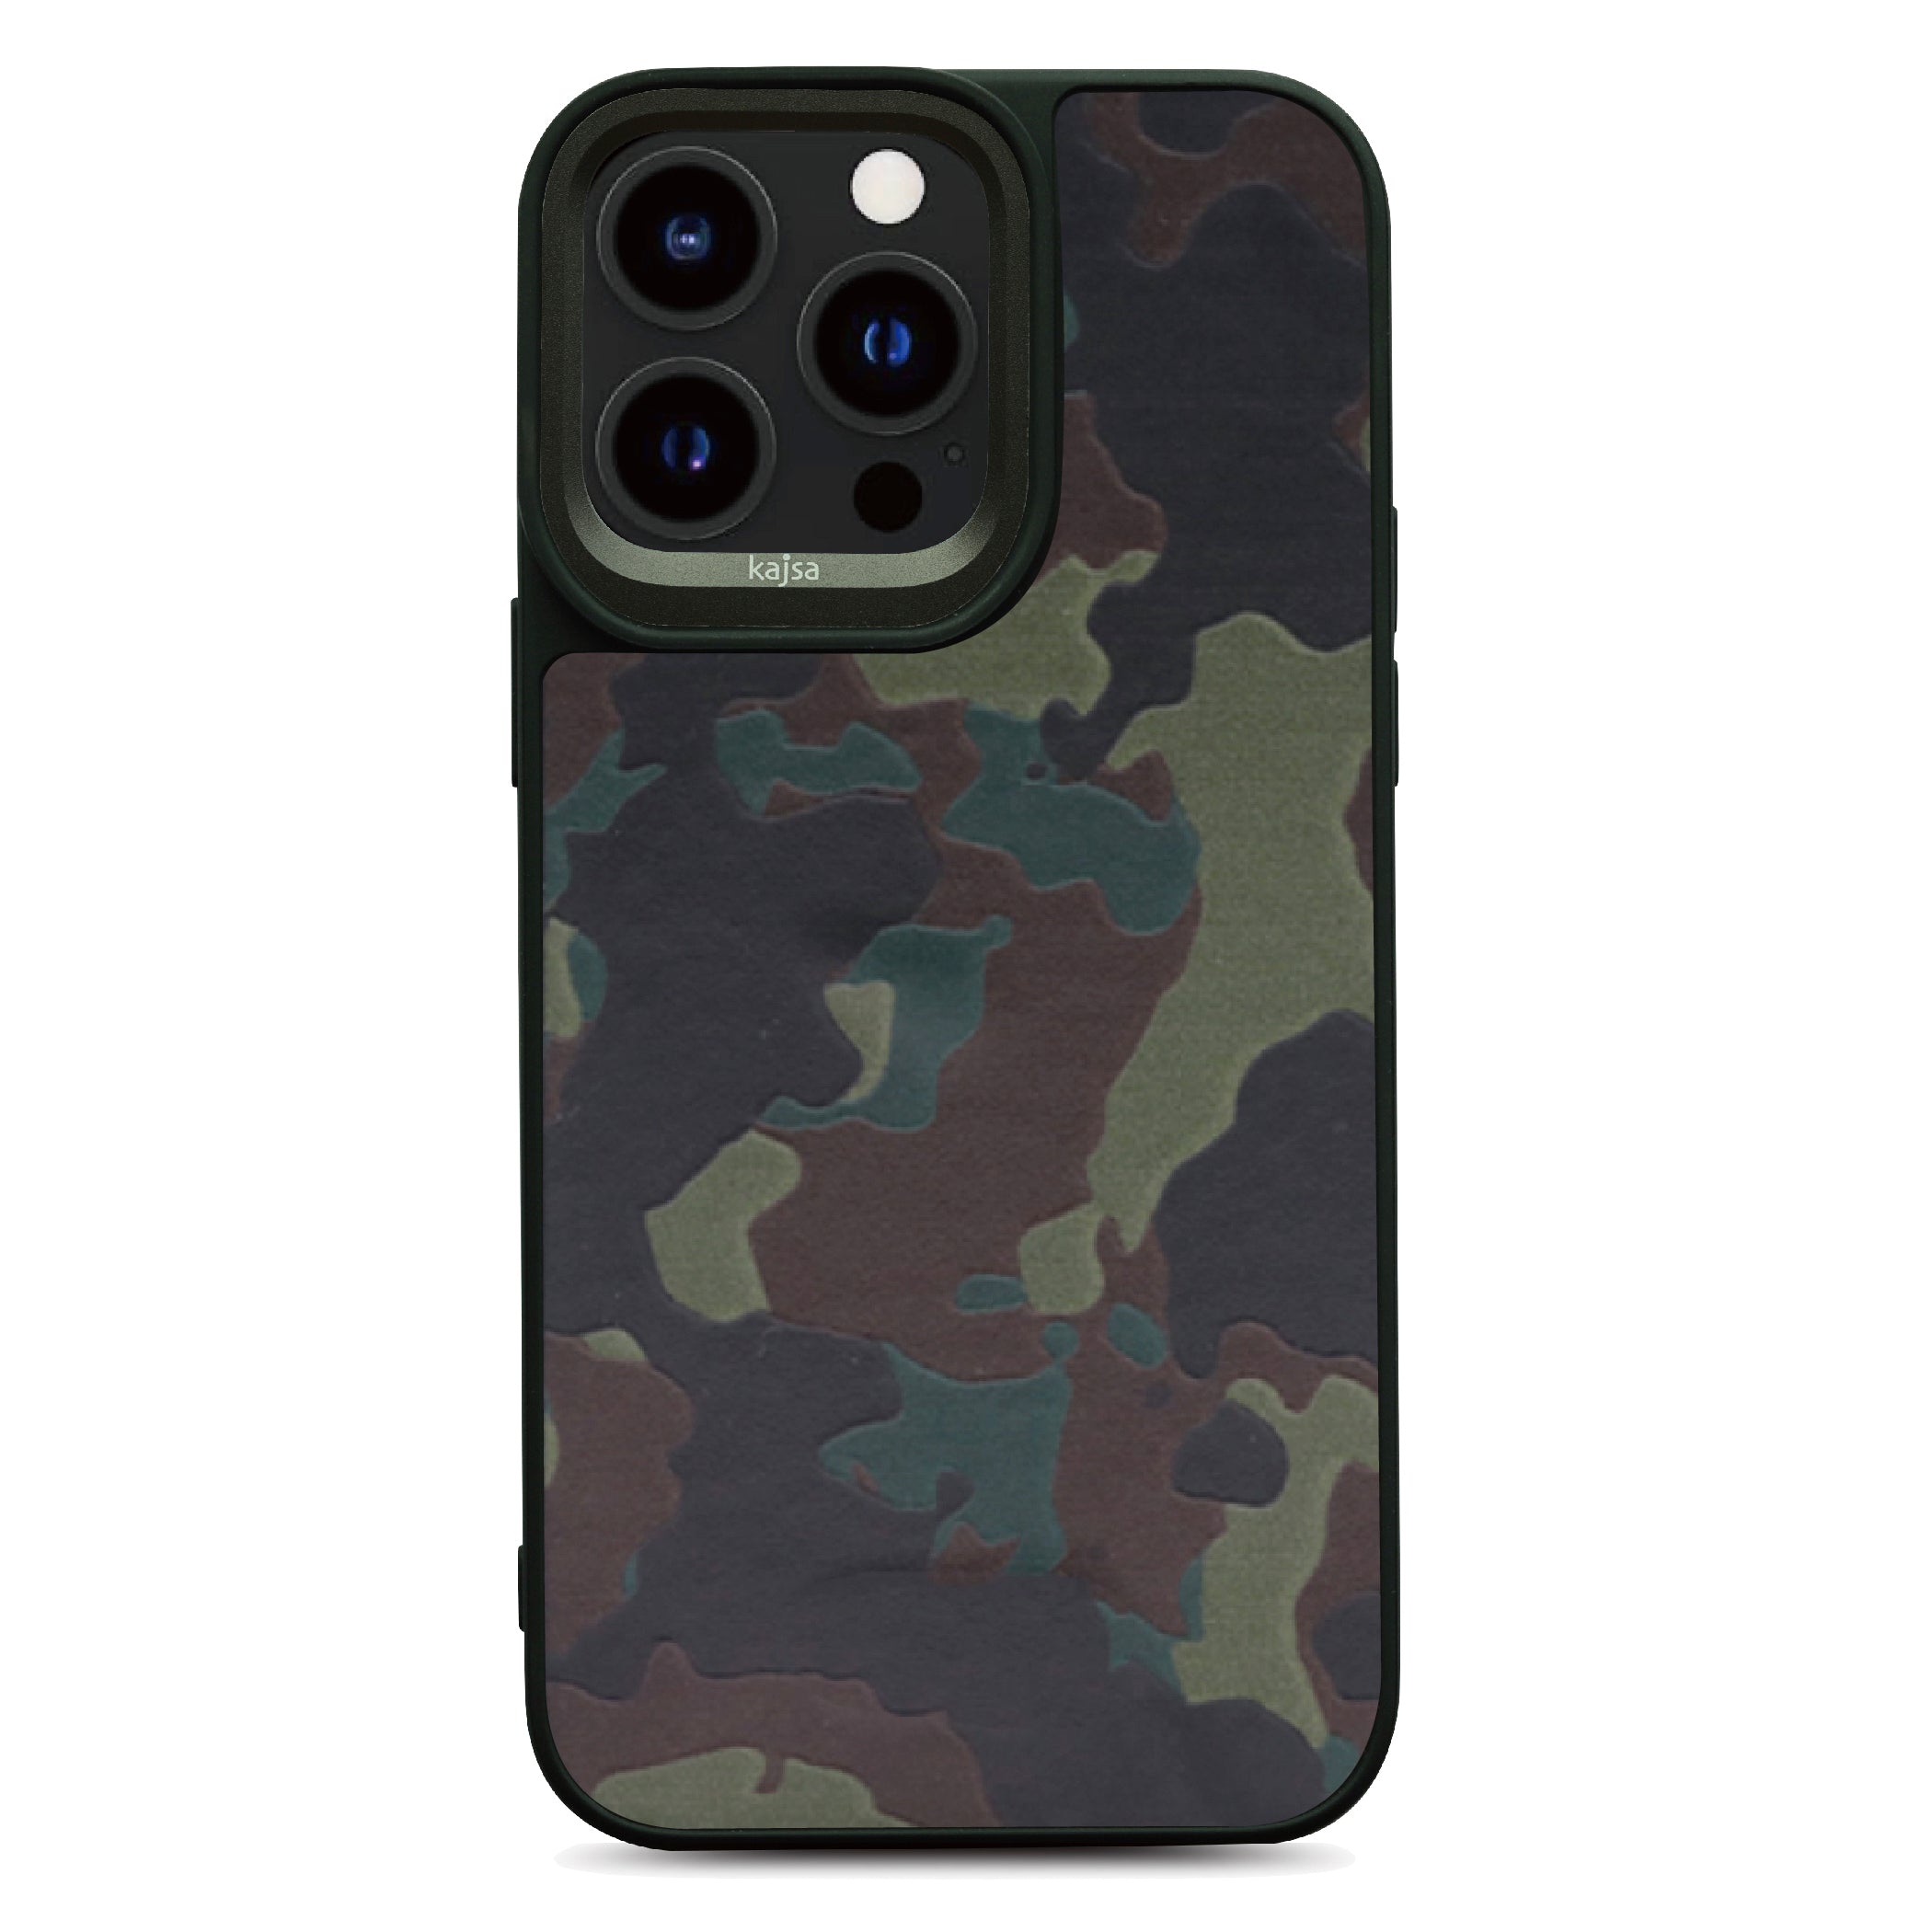 Military Collection - Back Case for iPhone 14-Phone Case- phone case - phone cases- phone cover- iphone cover- iphone case- iphone cases- leather case- leather cases- DIYCASE - custom case - leather cover - hand strap case - croco pattern case - snake pattern case - carbon fiber phone case - phone case brand - unique phone case - high quality - phone case brand - protective case - buy phone case hong kong - online buy phone case - iphone‎手機殼 - 客製化手機殼 - samsung ‎手機殼 - 香港手機殼 - 買電話殼